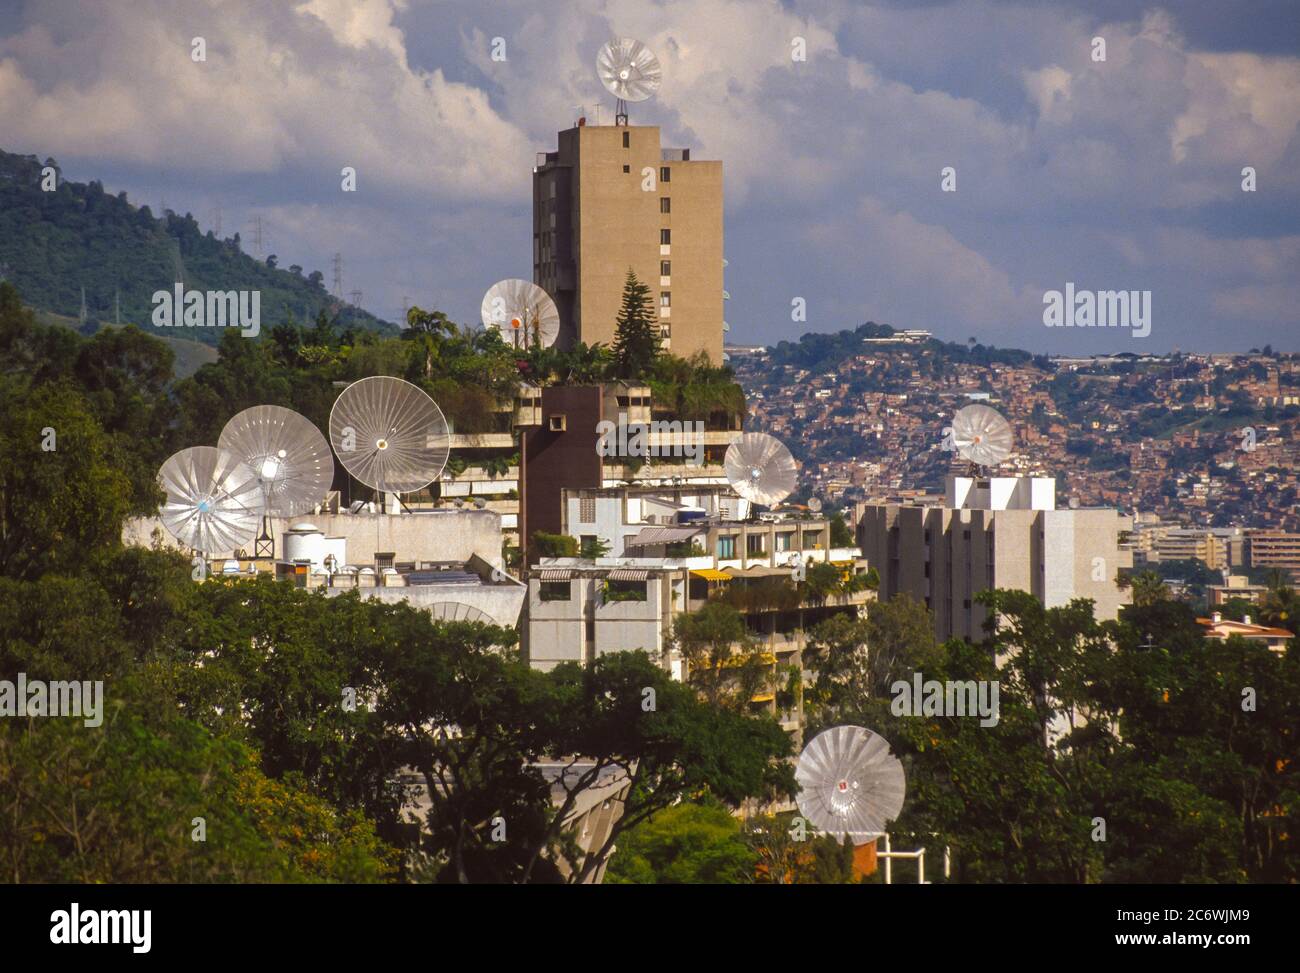 CARACAS, VENEZUELA - Eastern Caracas urban landscape with apartment buildings and satellite dishes. Stock Photo